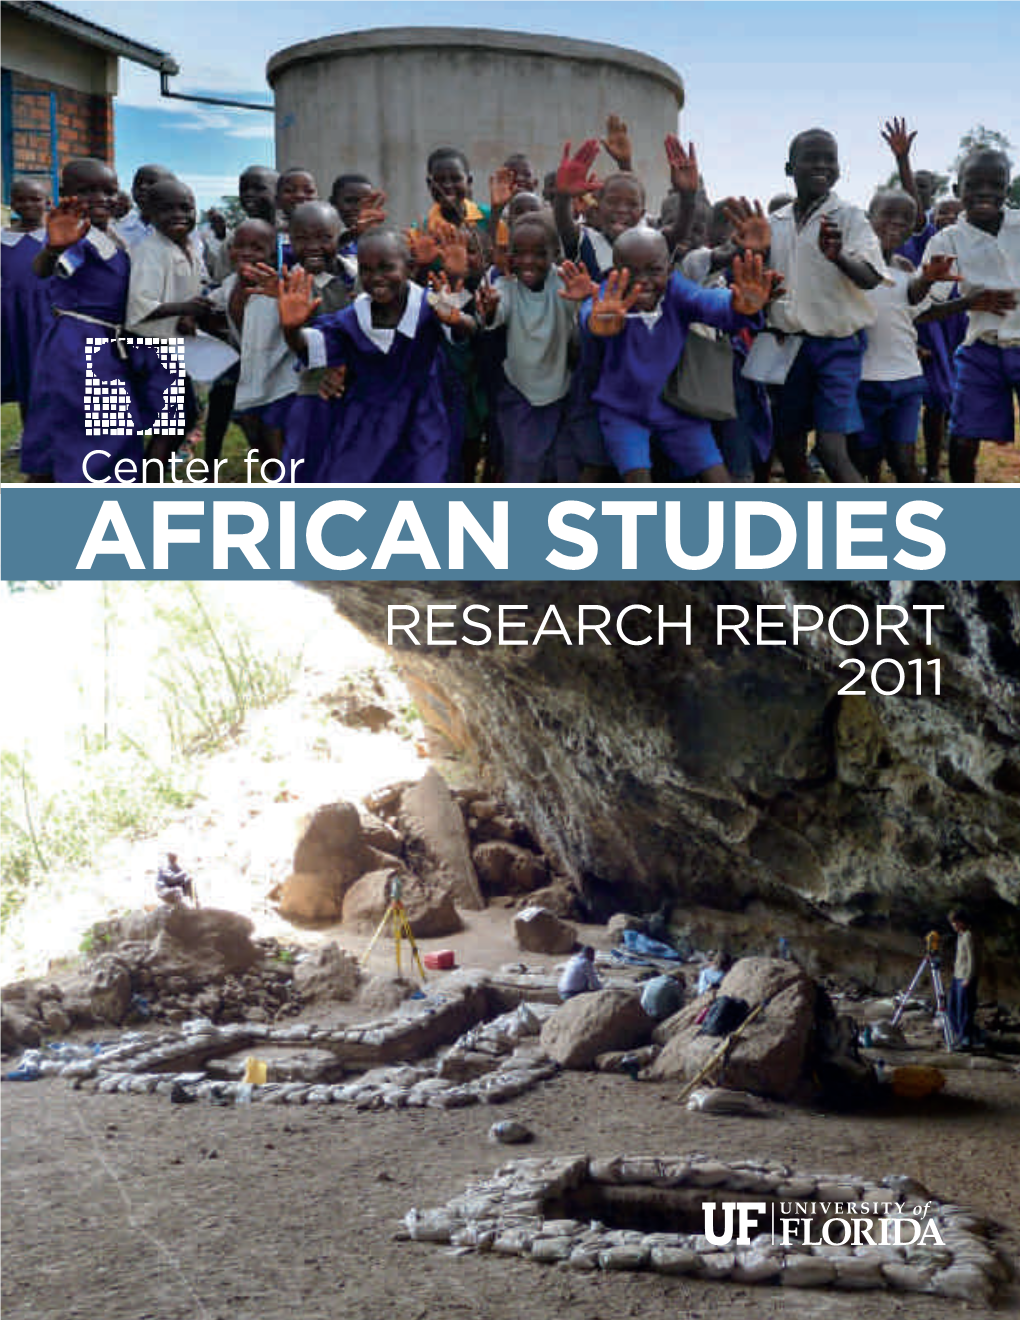 African Studies Research Report 2011 About the Center